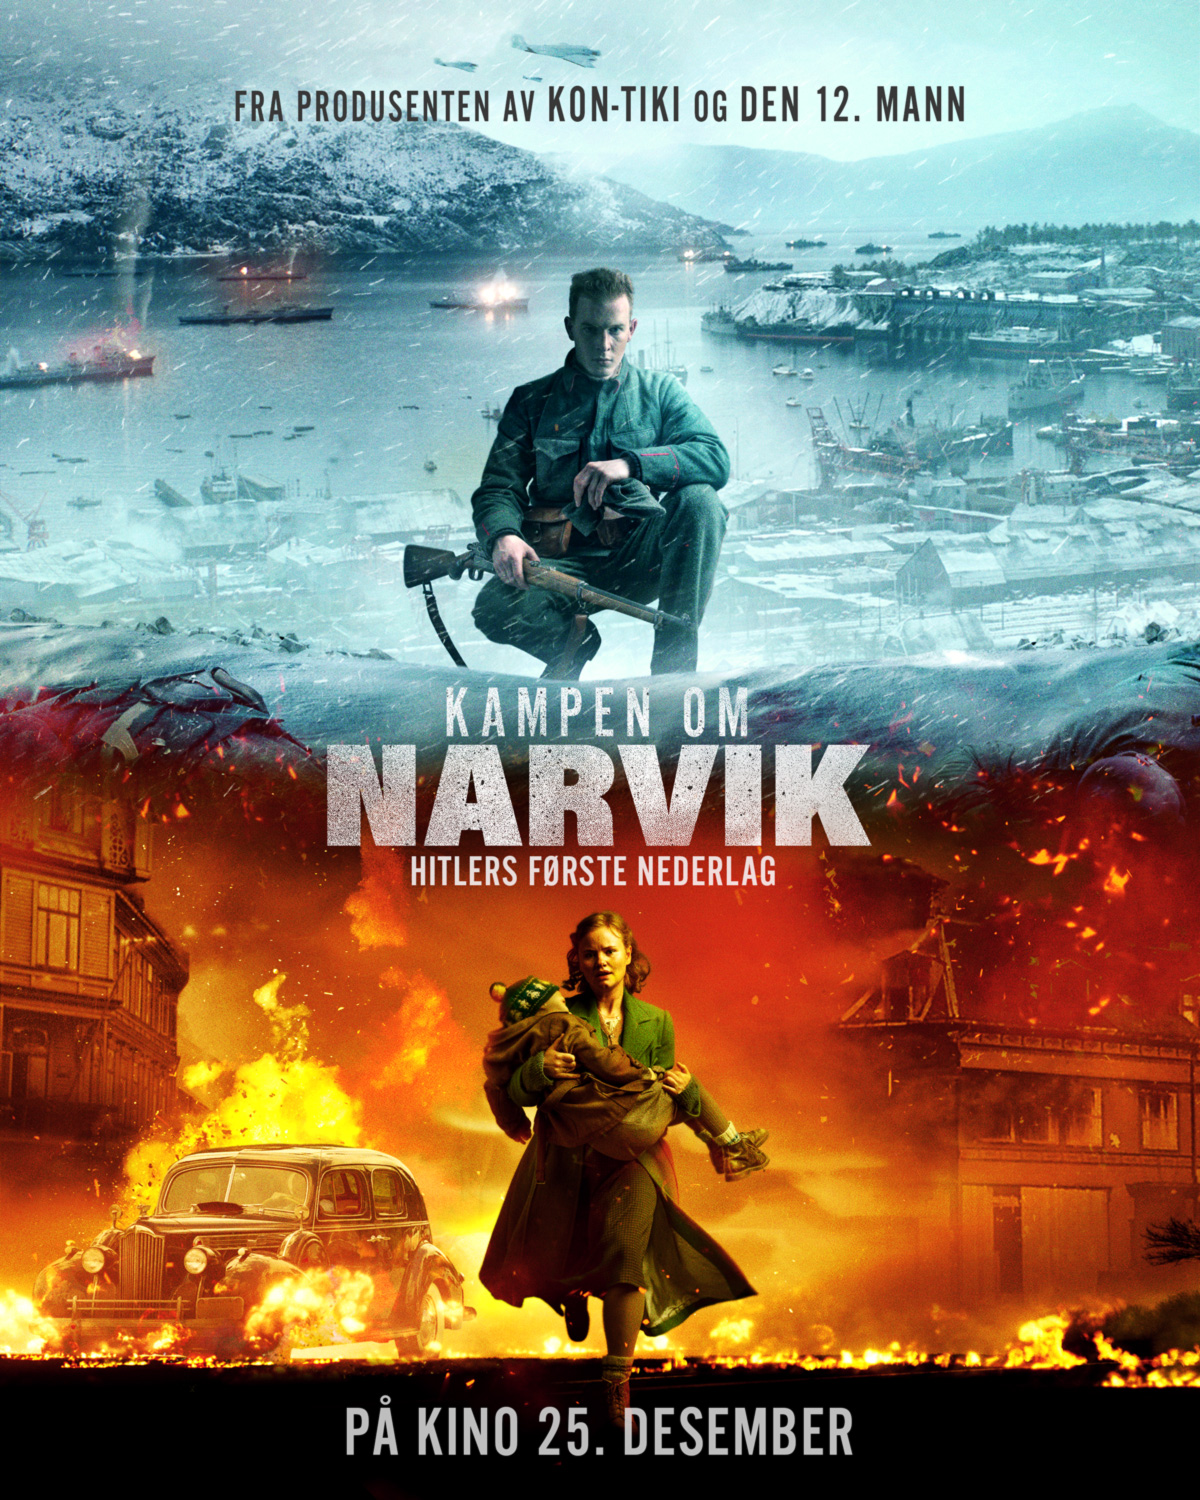 Narvik: Hitler's First Defeat movie poster